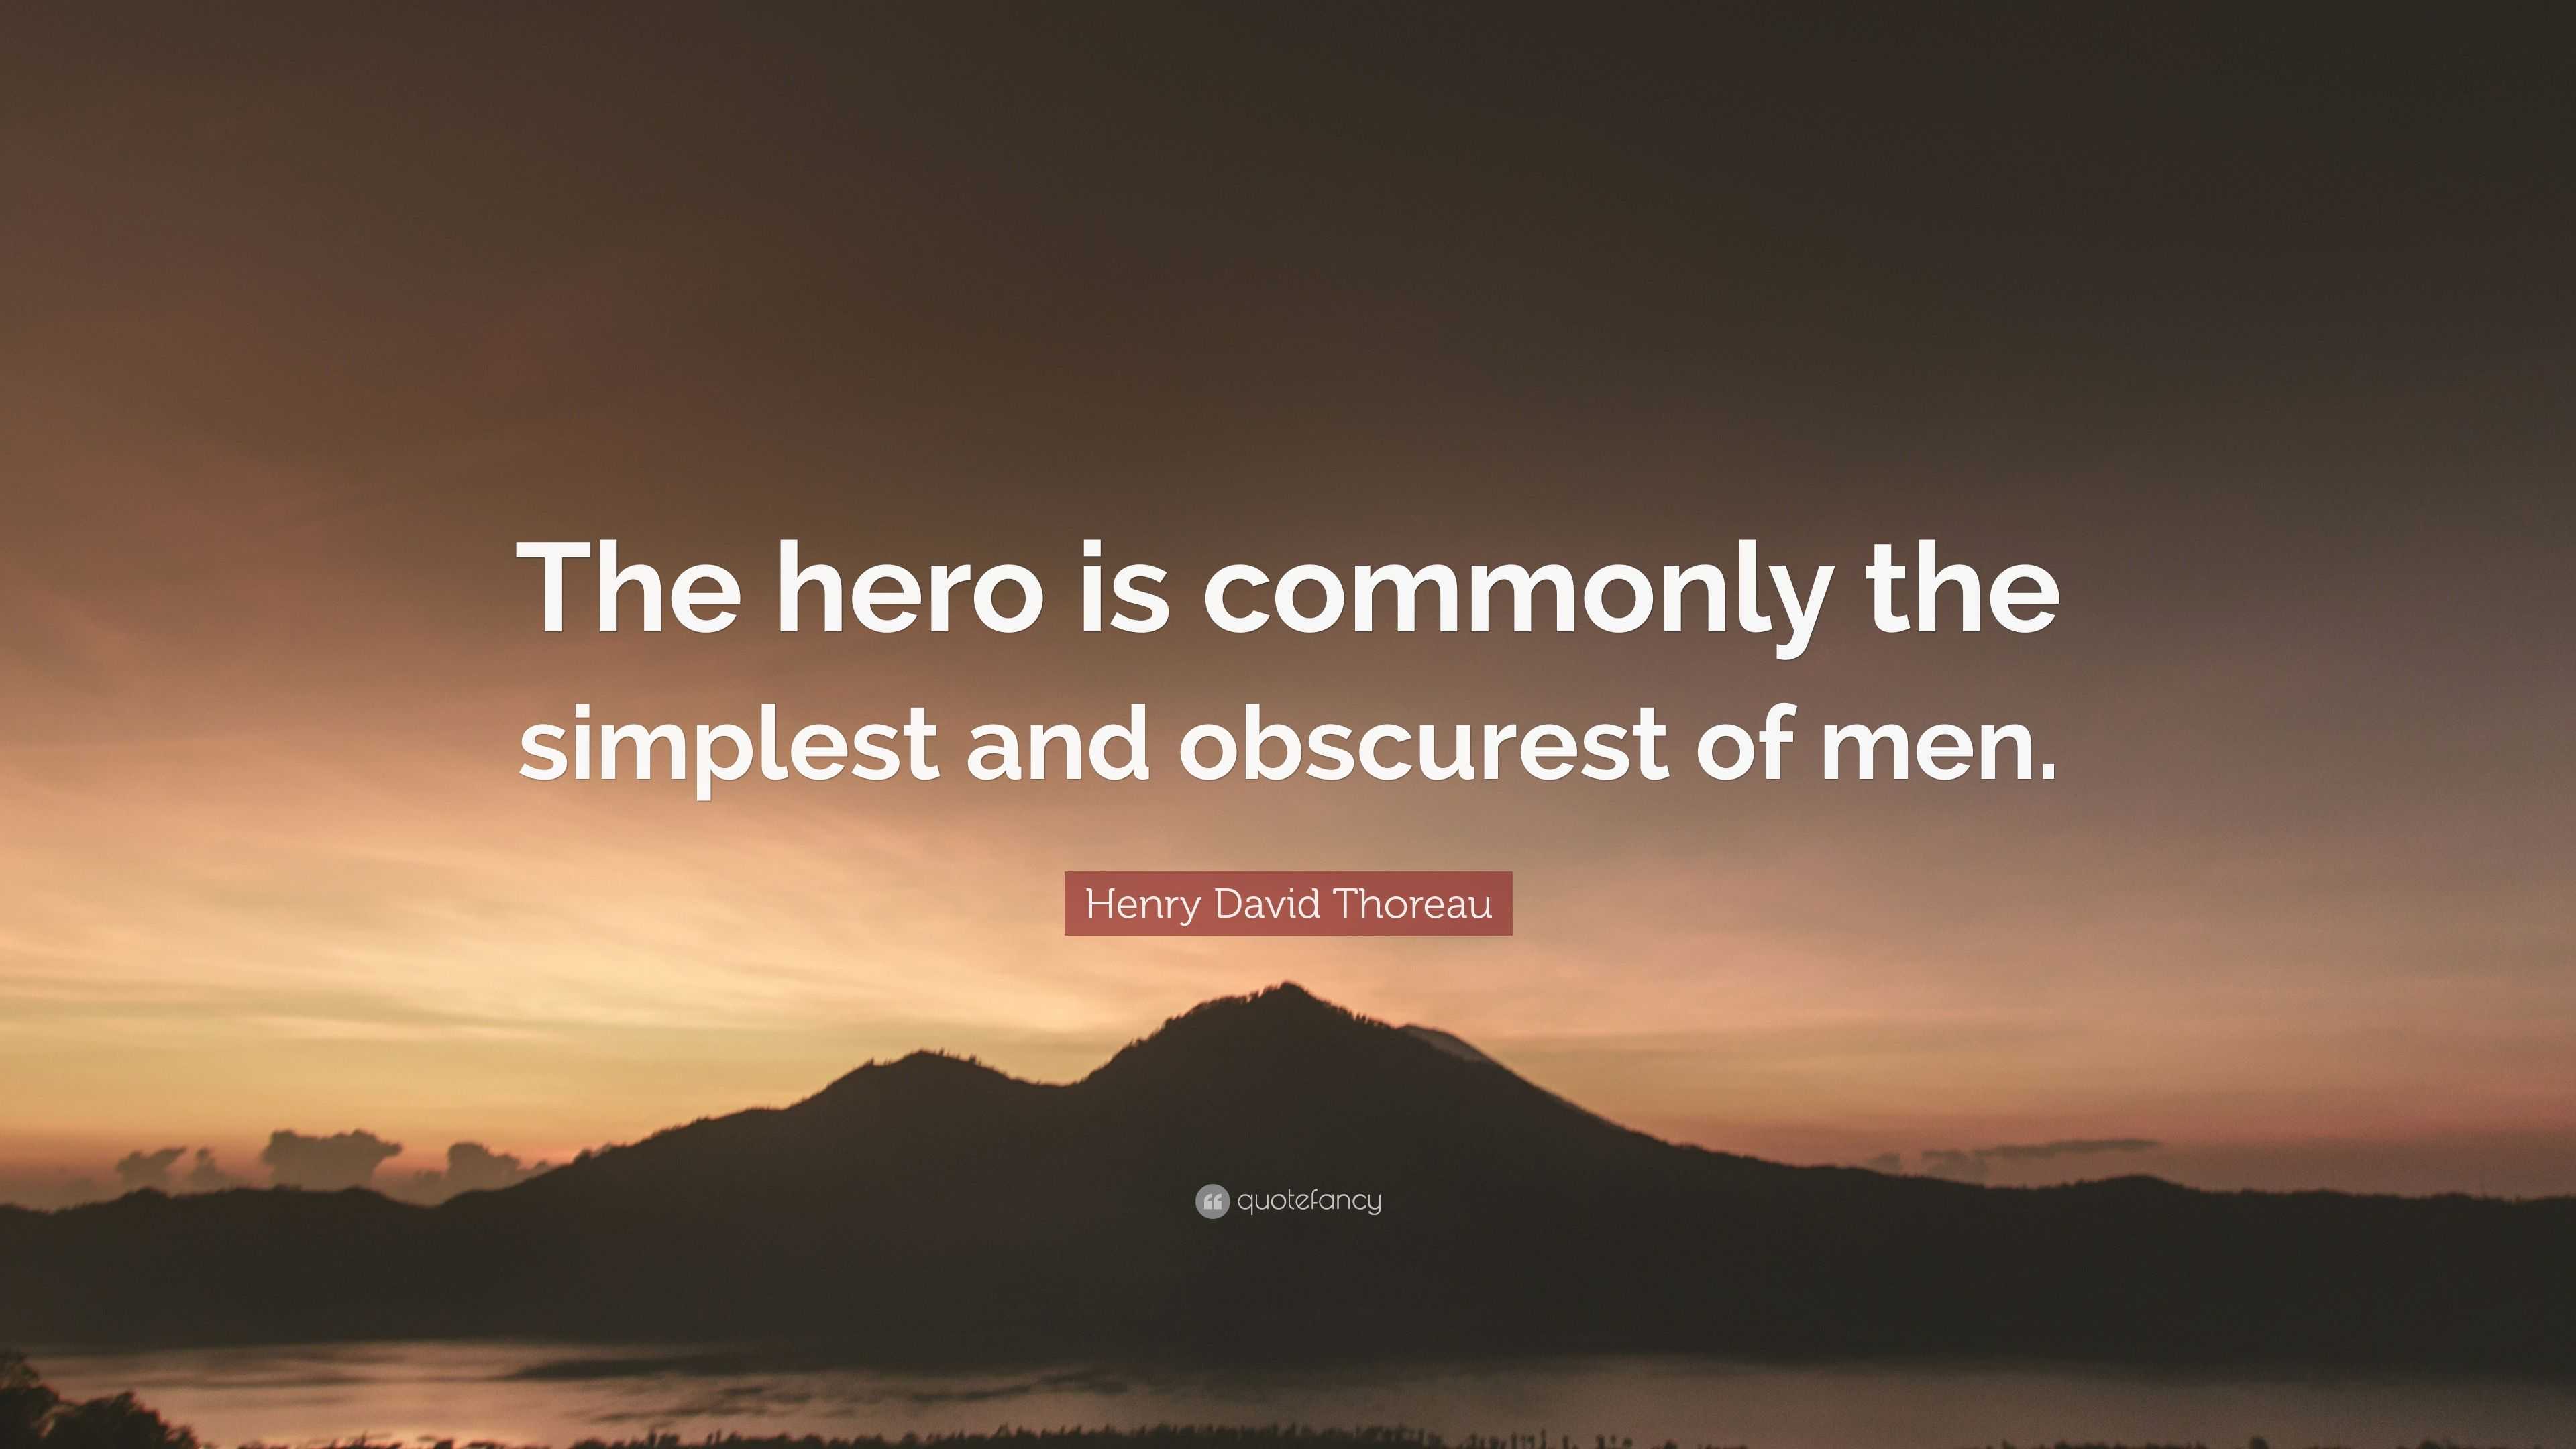 Henry David Thoreau Quote: “The hero is commonly the simplest and ...